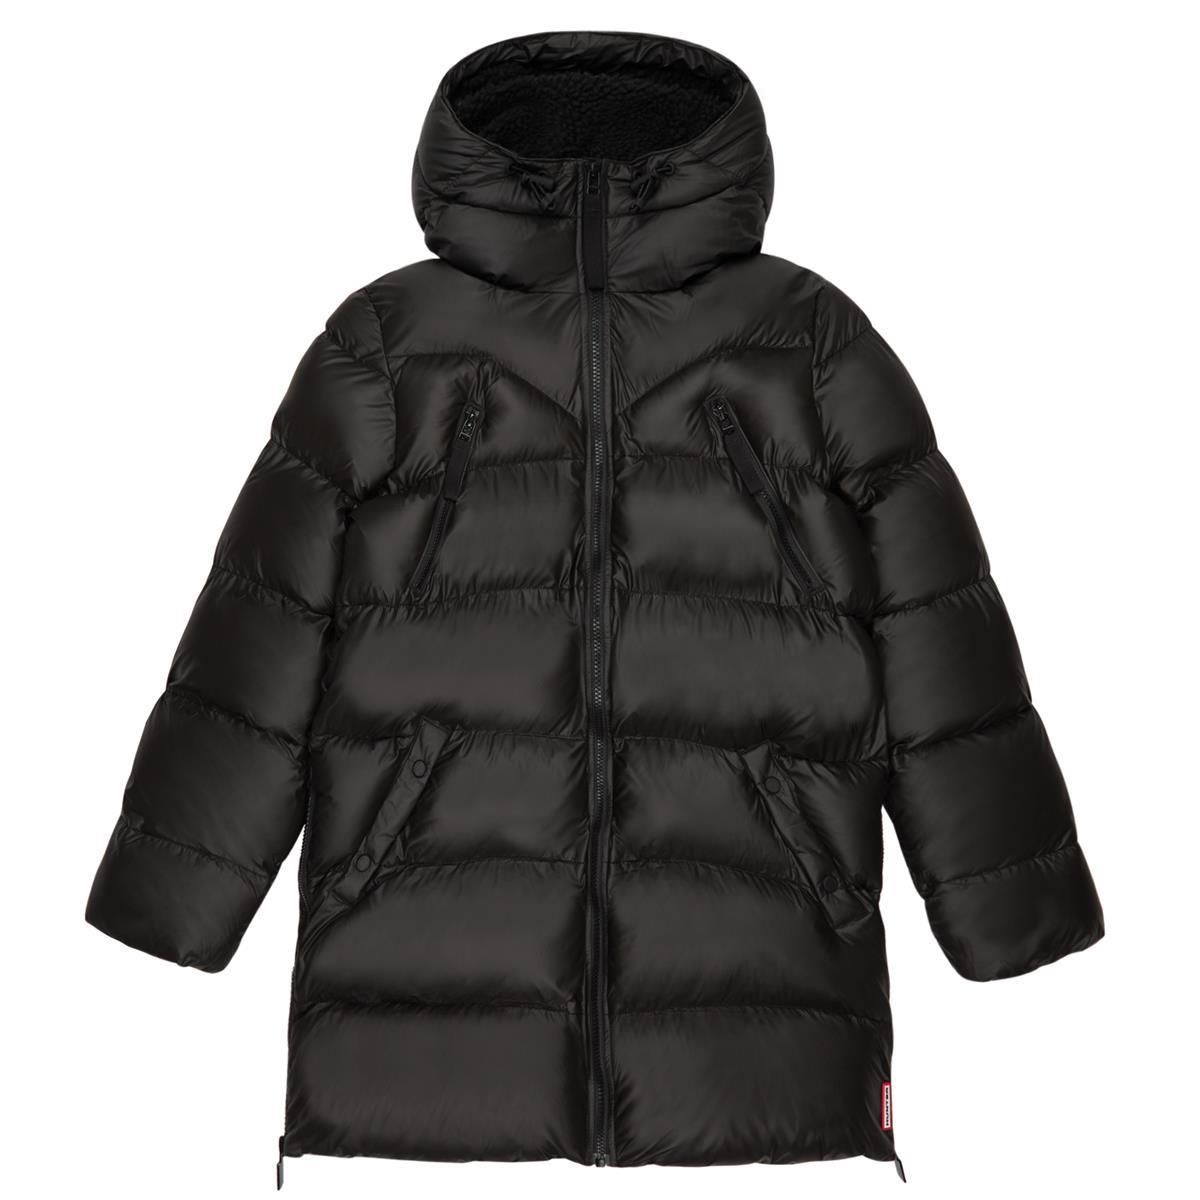 What changes have occurred to the Hunter puffer jacket for women?